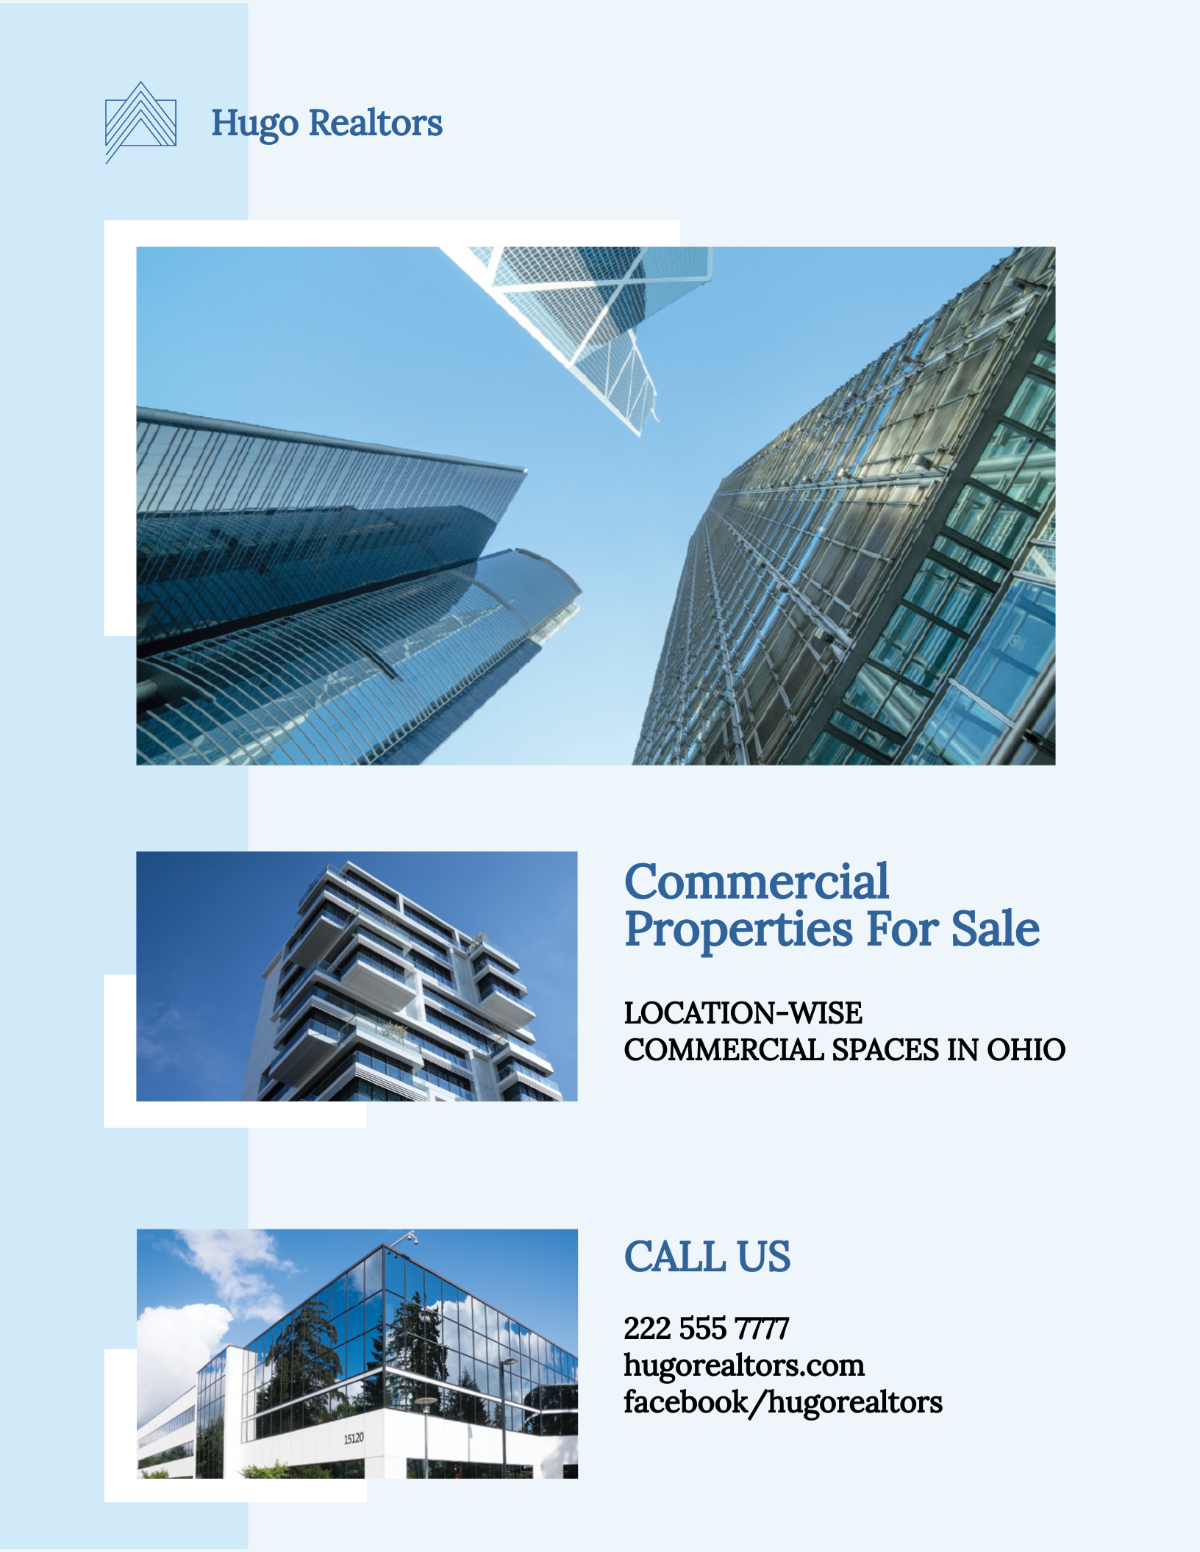 Commercial Real Estate Flyer Template